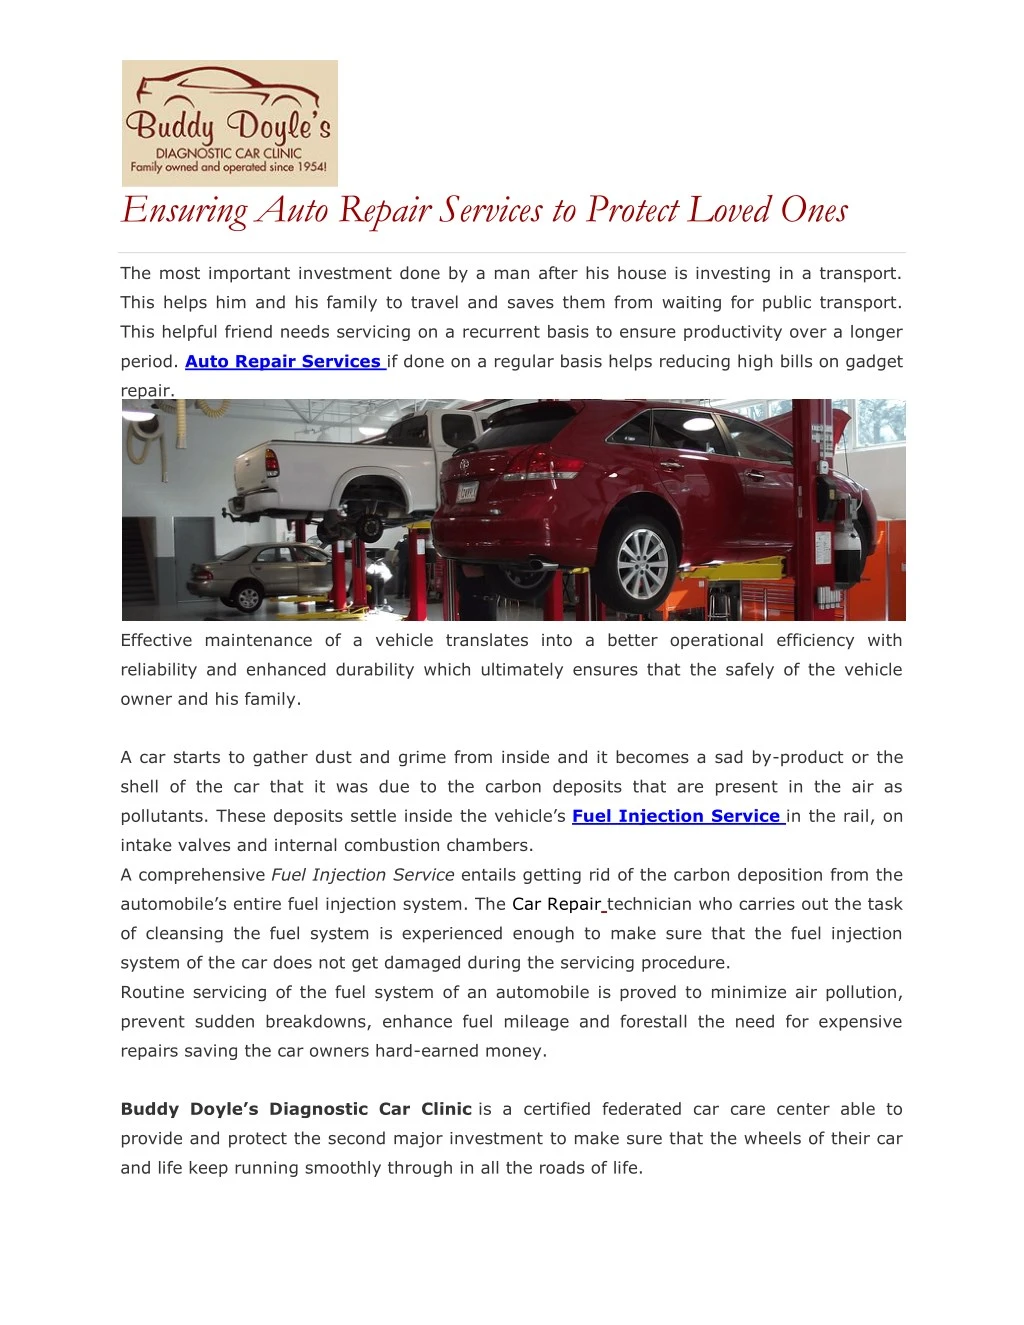 ensuring auto repair services to protect loved